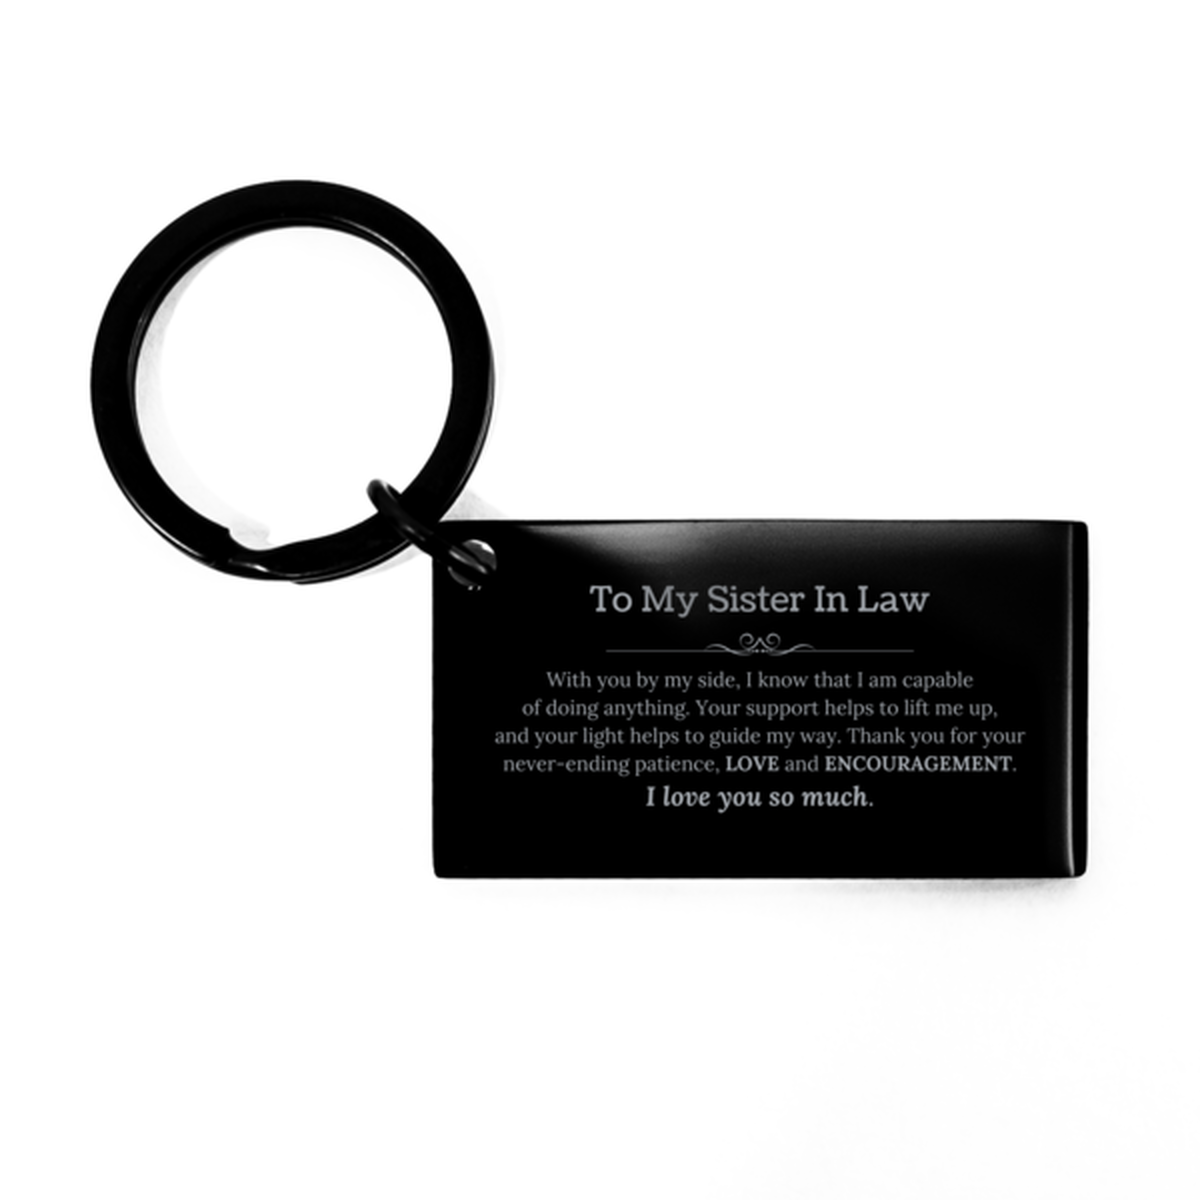 Appreciation Sister In Law Keychain Gifts, To My Sister In Law Birthday Christmas Wedding Keepsake Gifts for Sister In Law With you by my side, I know that I am capable of doing anything. I love you so much